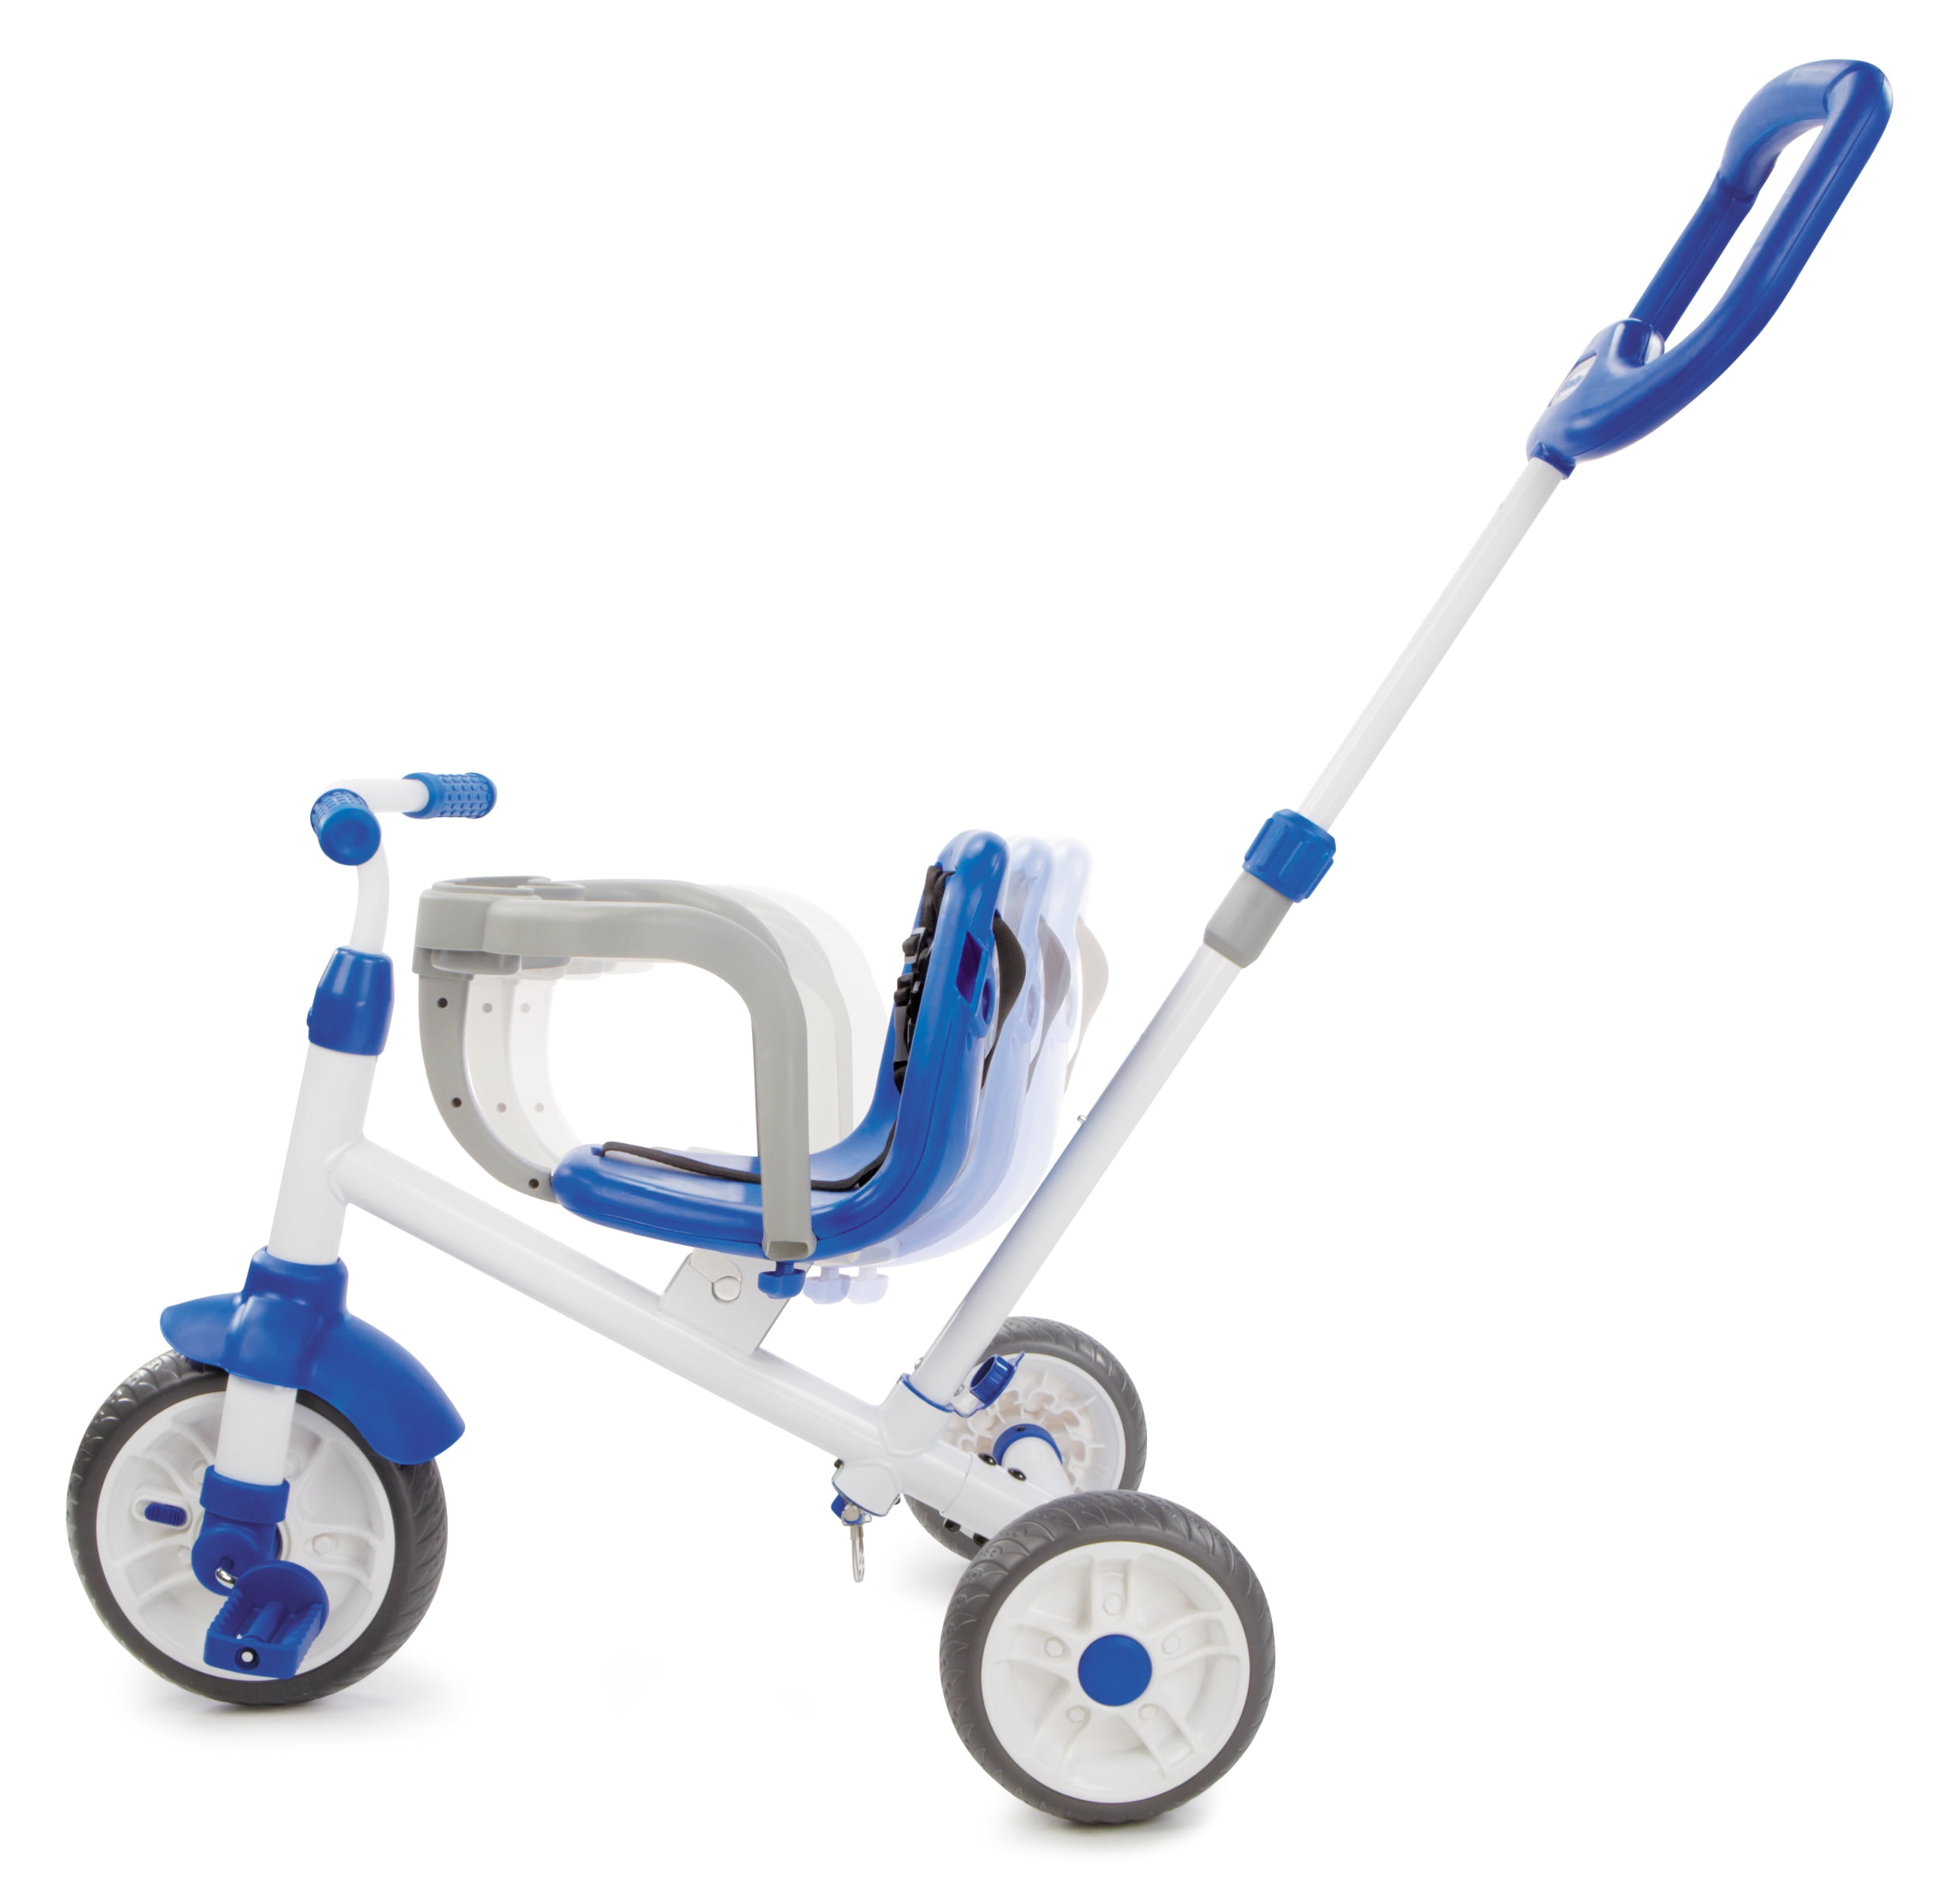 Tikes with Toddlers Little Growth For Tricycle 3-in-1 Years Girls of Stages 3 Blue, Months Old Ride to Trike Kids in - Learn \'N 9 3 for Boys Convertible